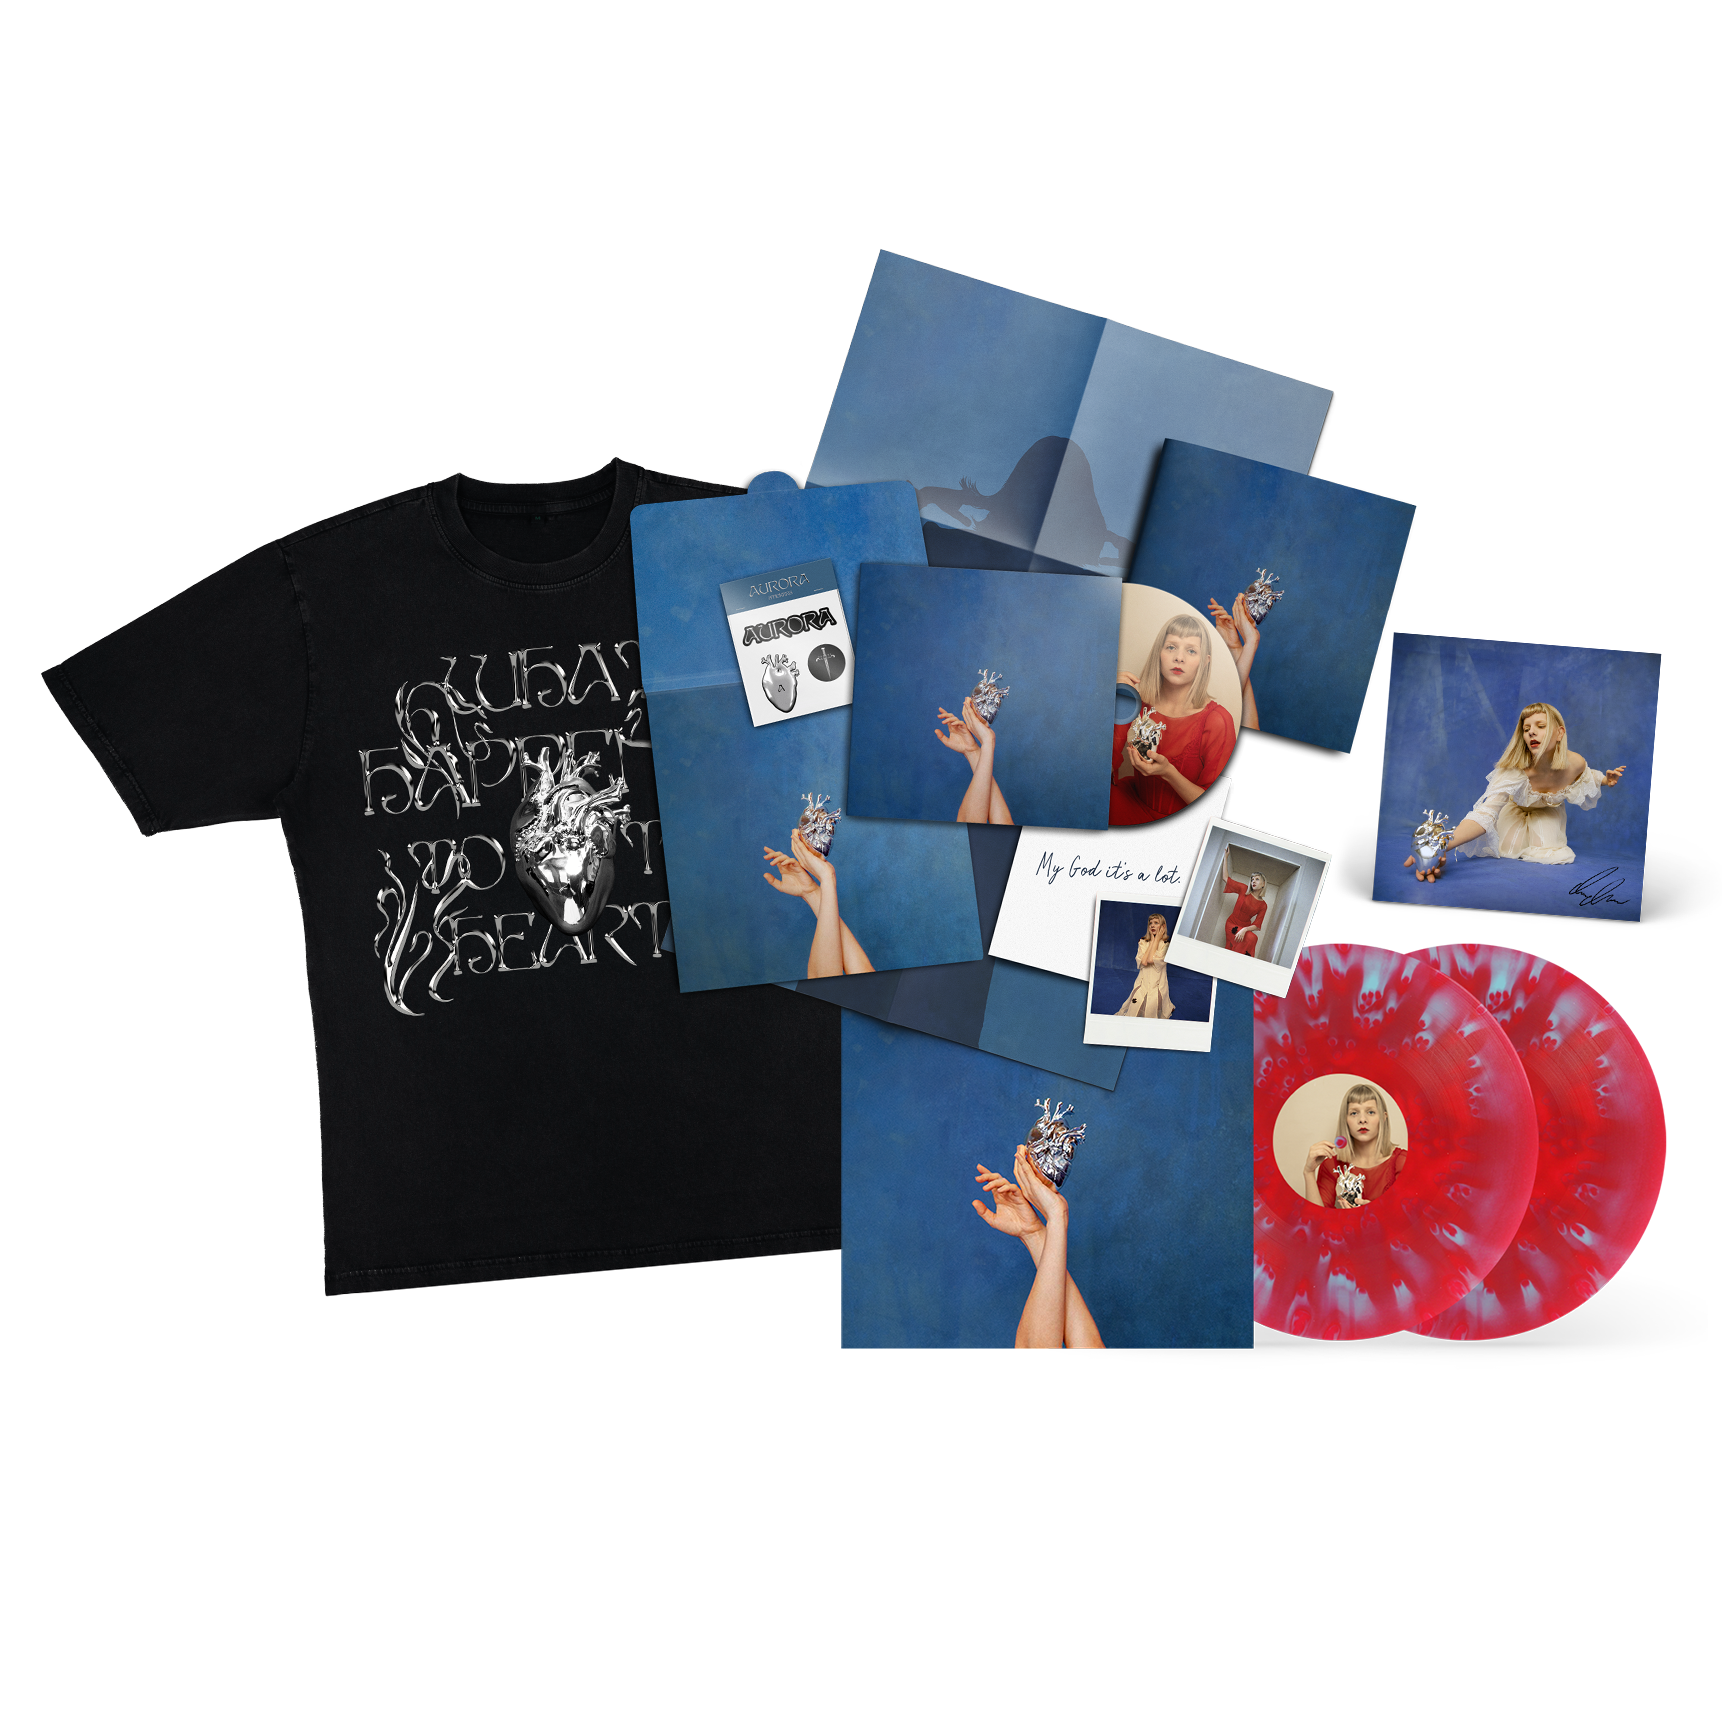 What Happened To The Heart? Exclusive Fanpack, Exclusive 2LP, T-shirt & Signed Art Card